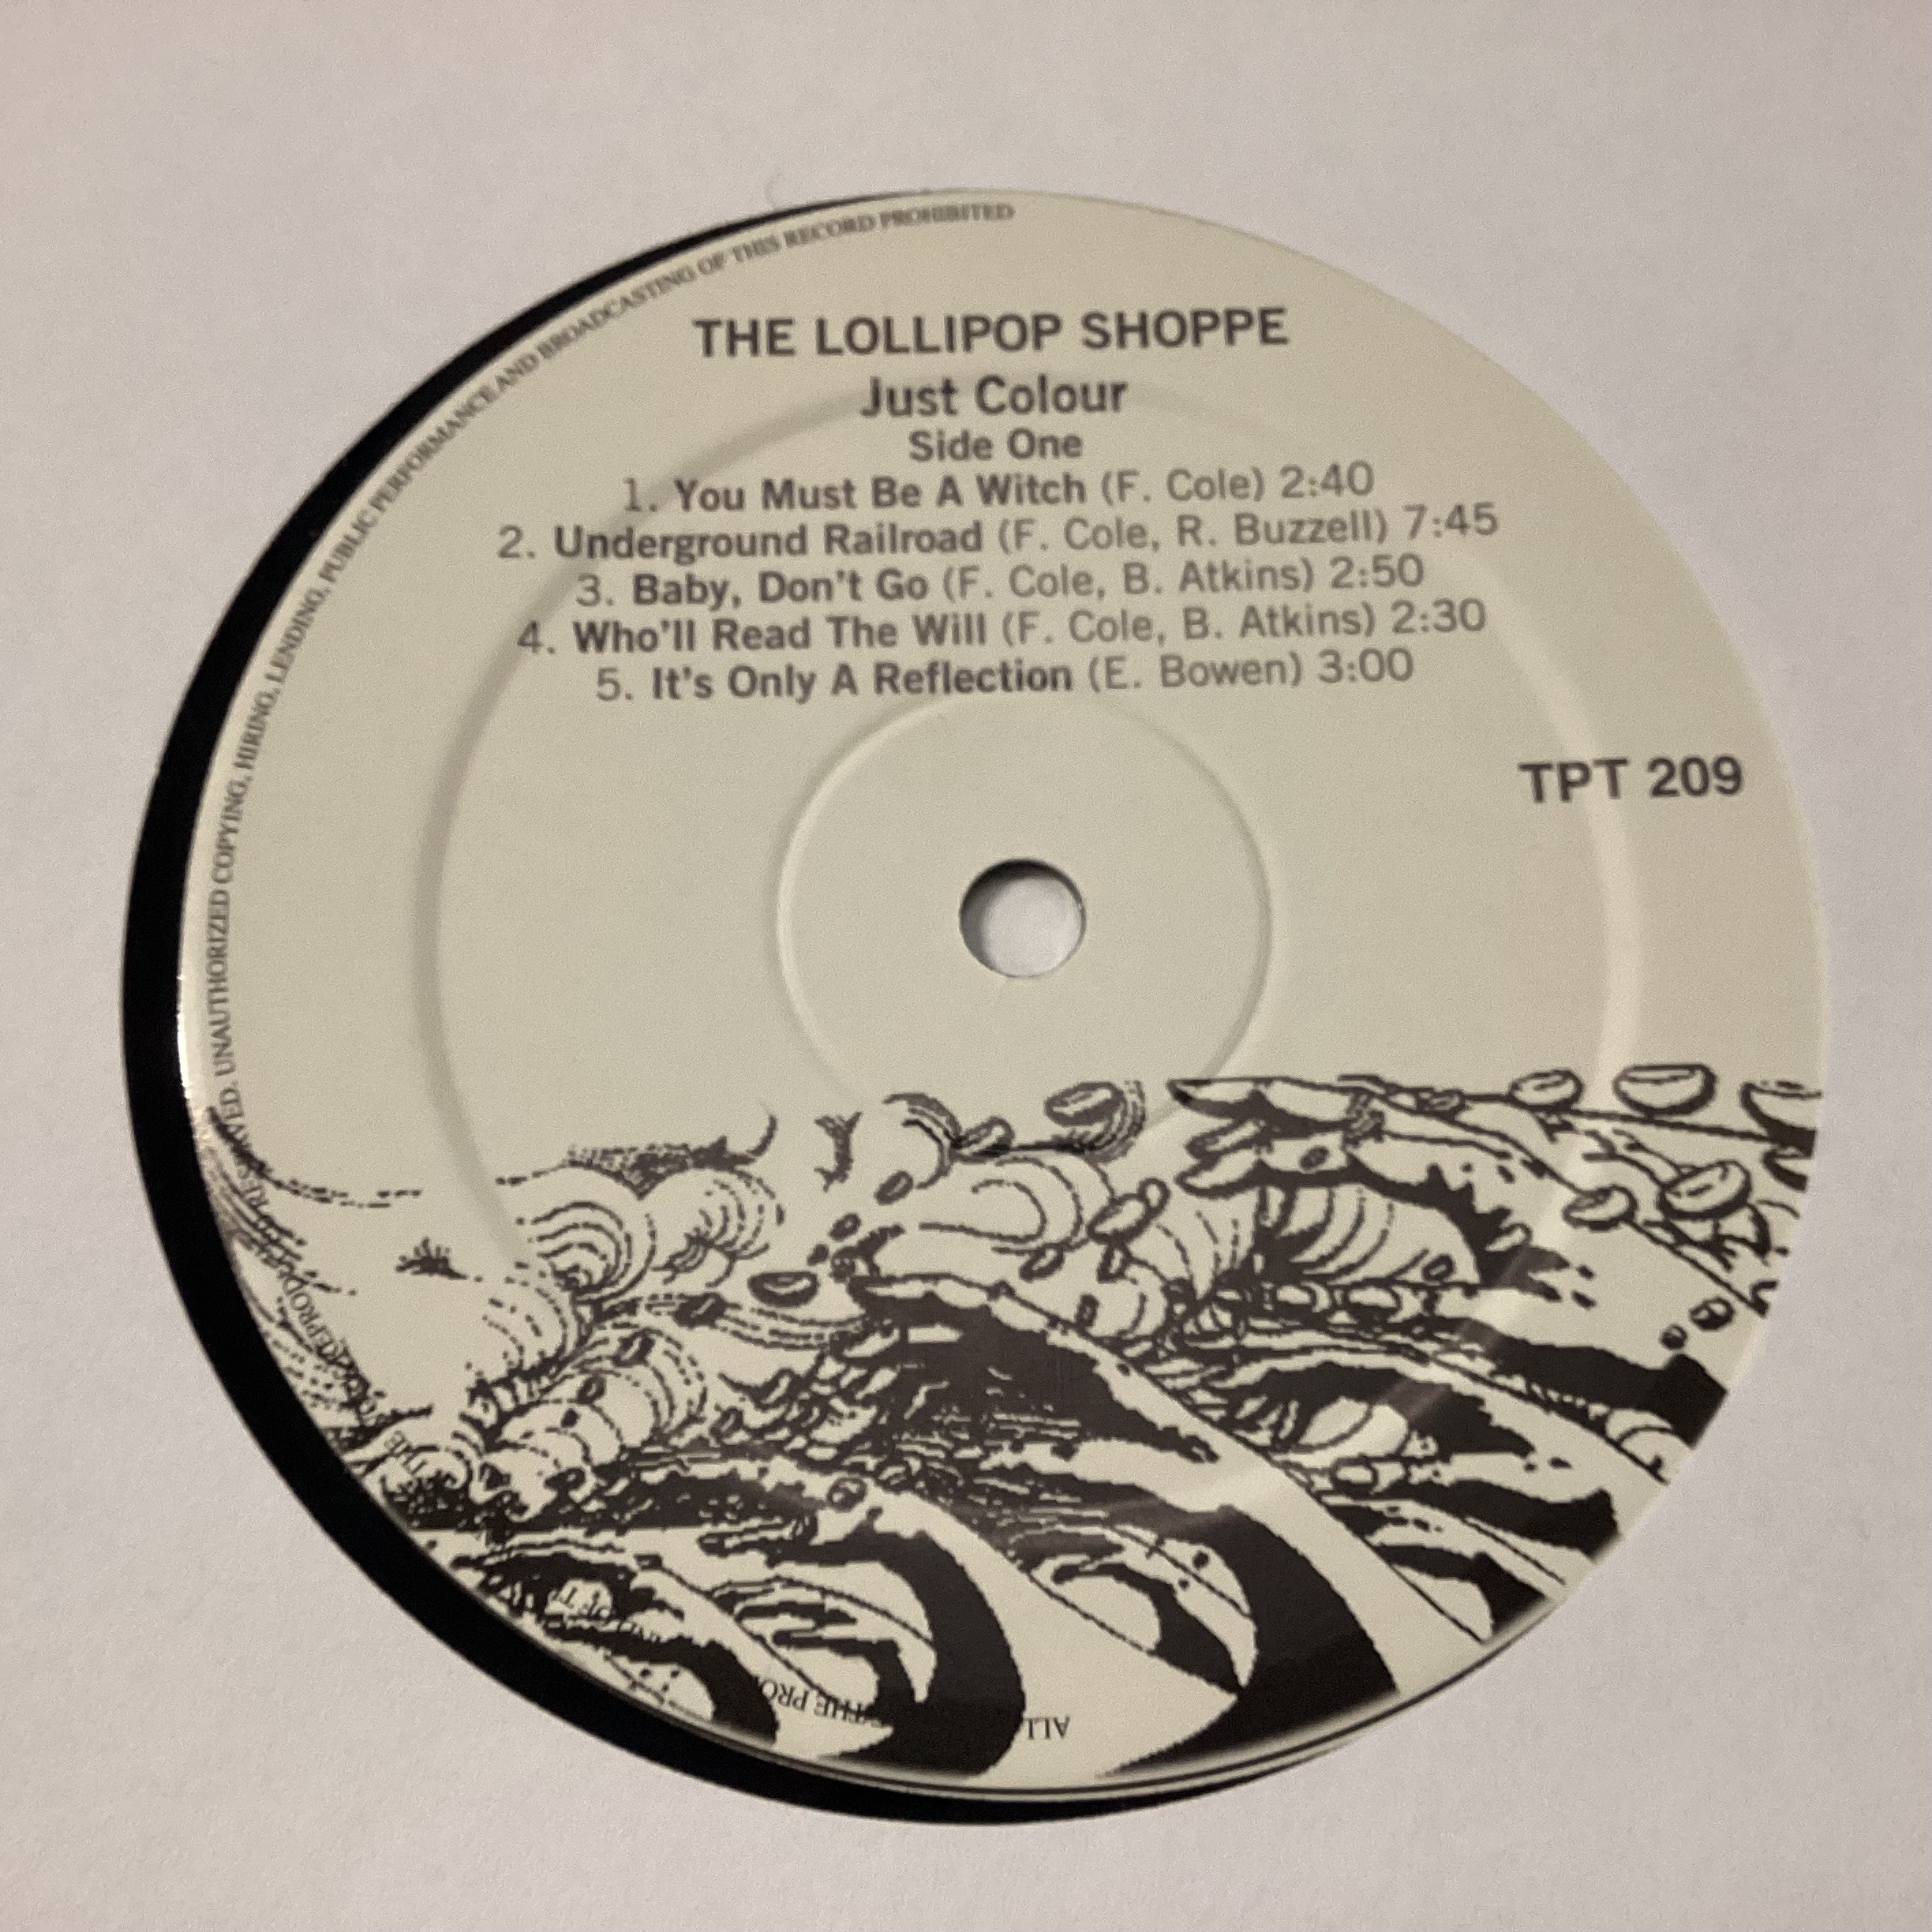 THE LOLLIPOP SHOPPE ‘JUST COLOUR’ VINYL ALBUM. Found here pressed on Tapestry Records TPT 209 from - Image 5 of 5